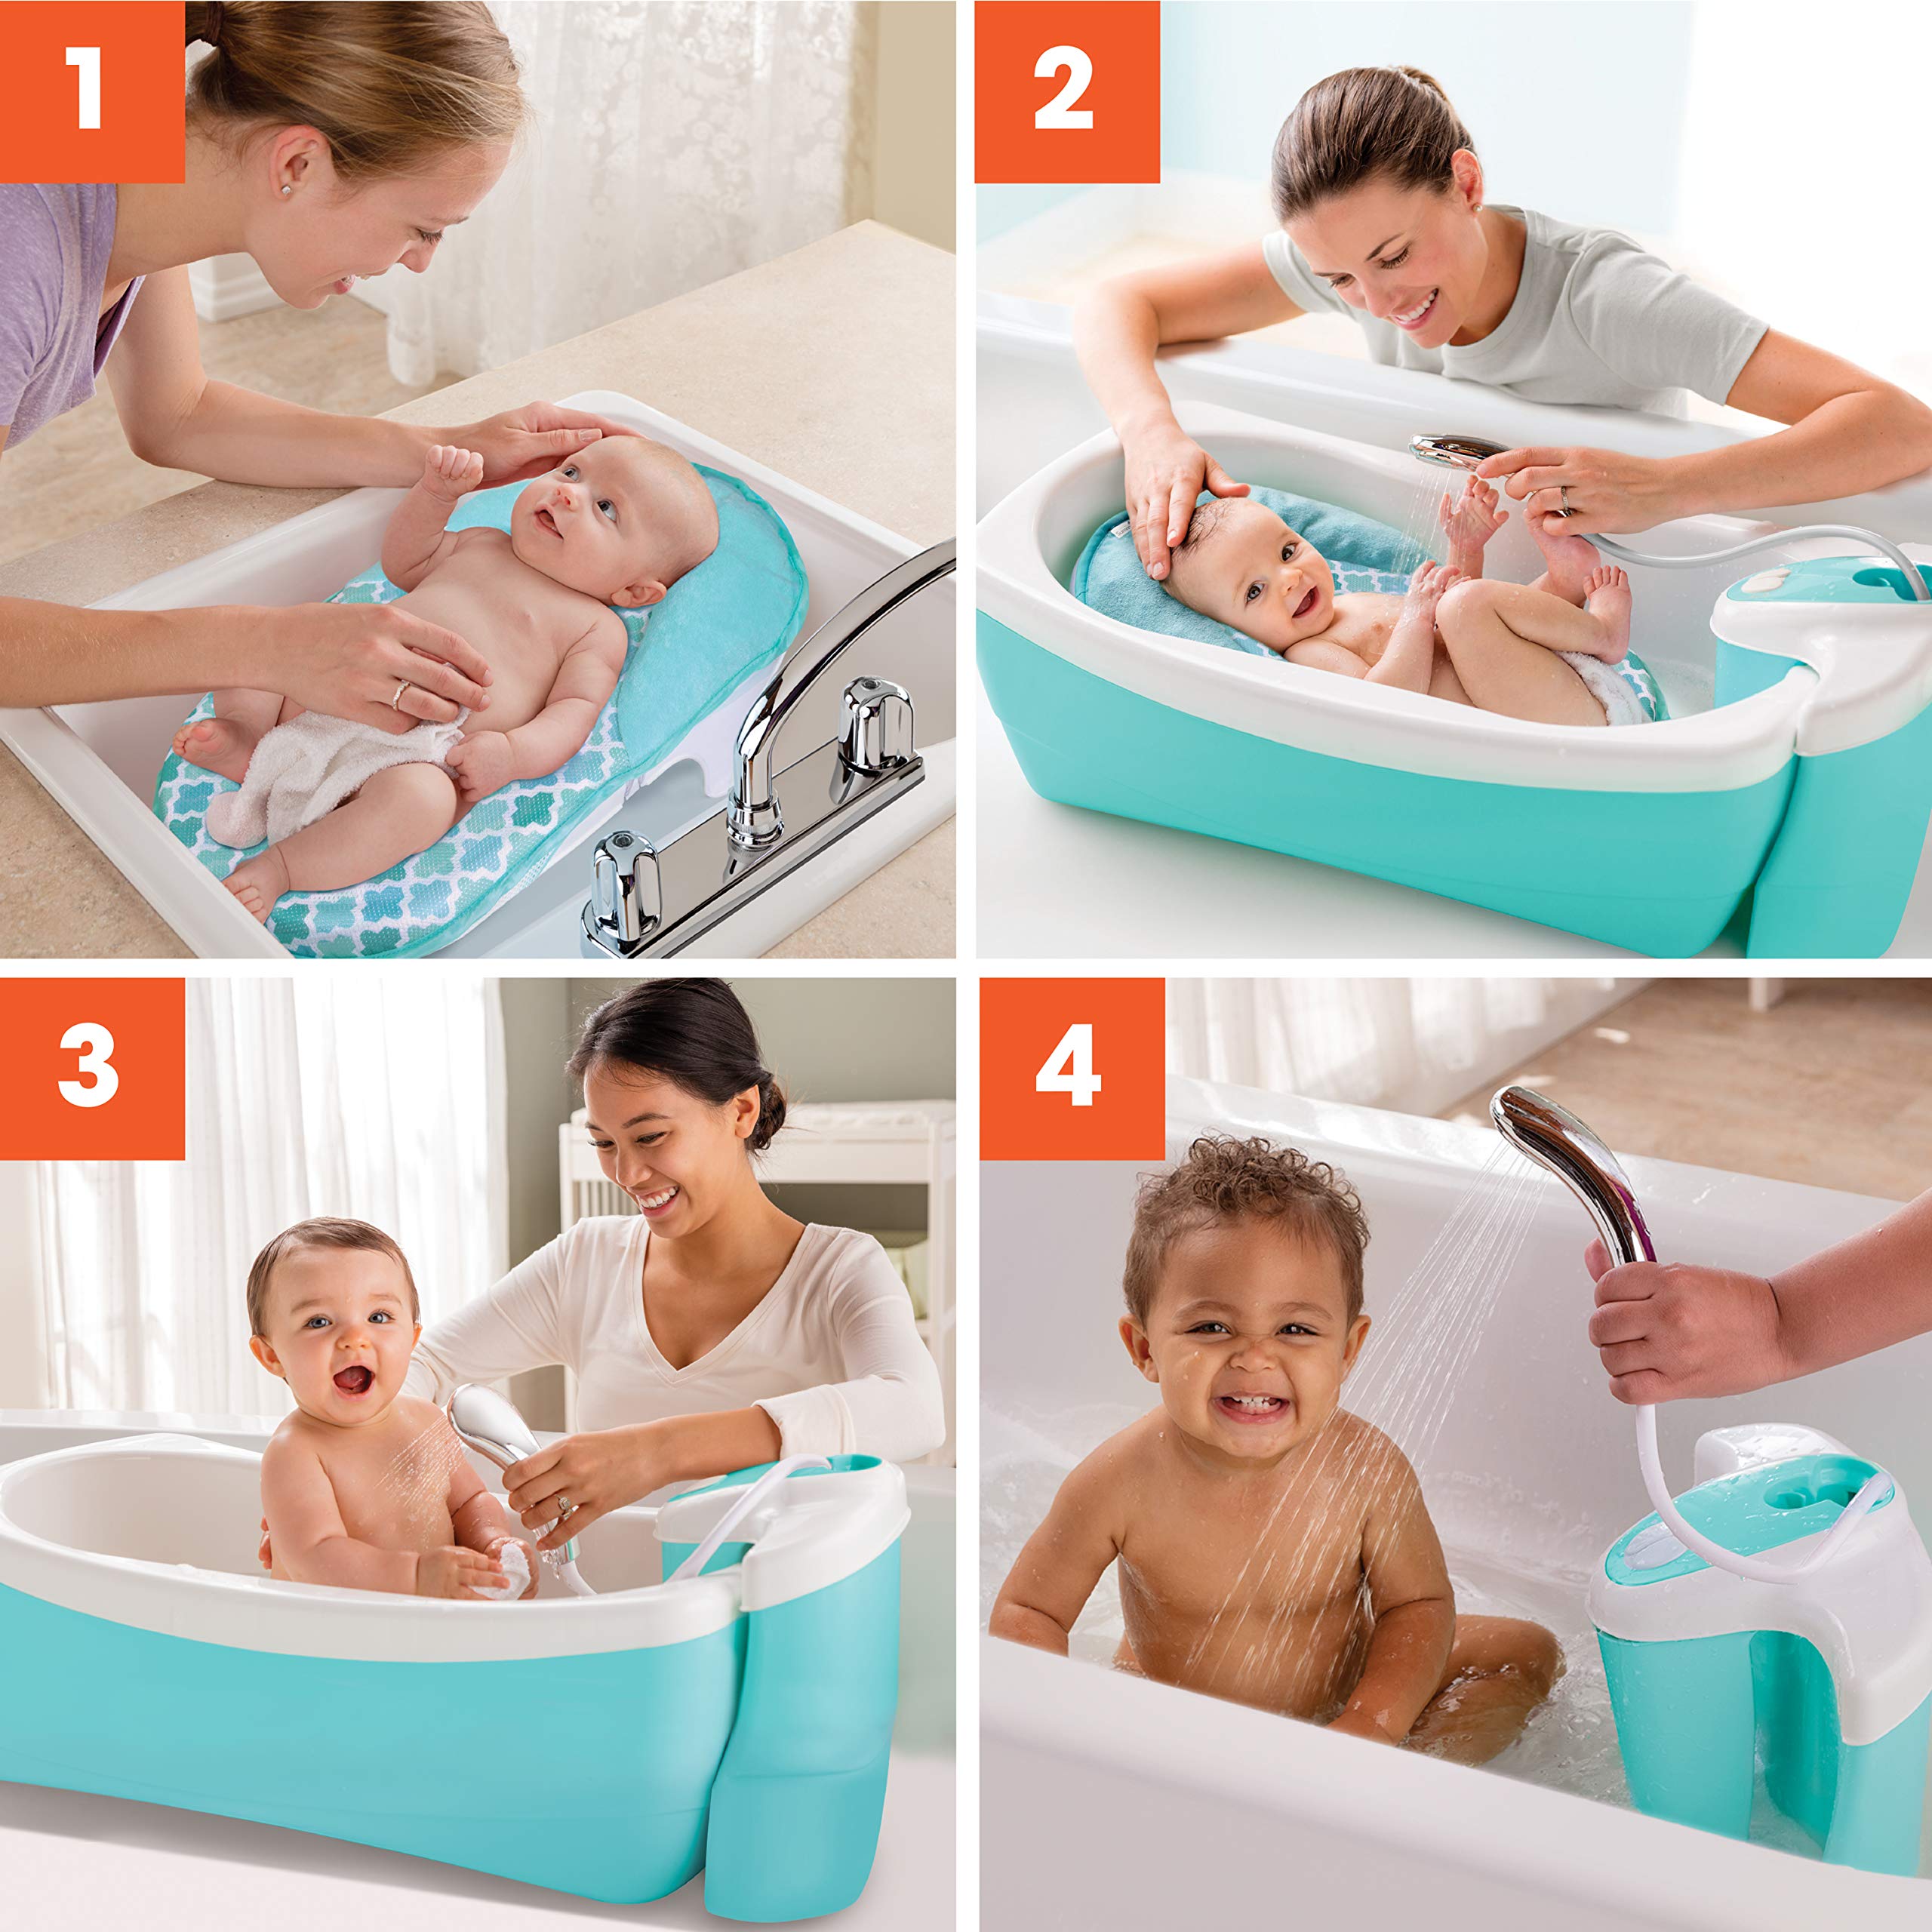 Summer Lil Luxuries Whirlpool Bubbling Spa & Shower (Blue) - Luxurious Baby Bathtub with Circulating Water Jets, 2 Count (Pack of 1)